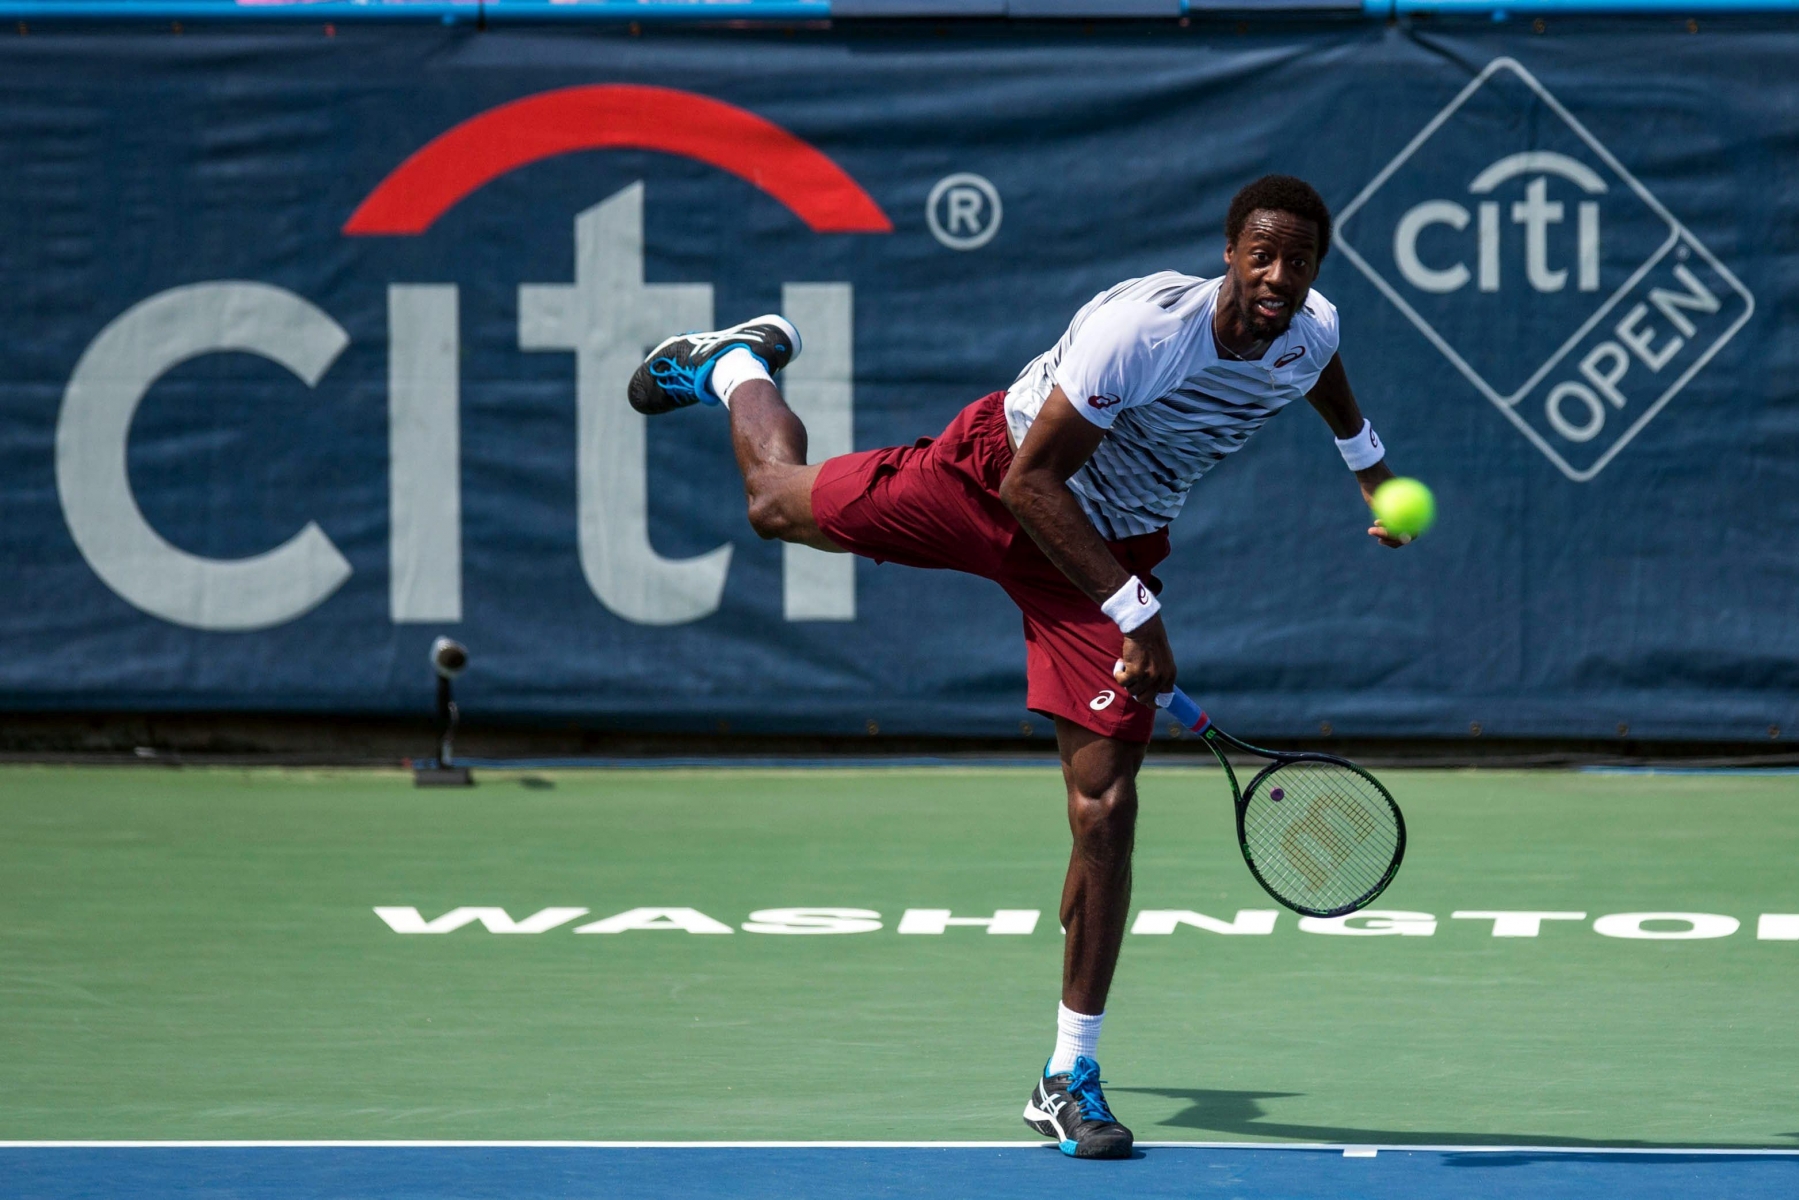 epa05439648 Gael Monfils of France in against Ivo Karlovic of Croatia during the men's final match of the Citi Open tennis tournament, at Rock Creek Park Tennis Center in Washington, DC, USA, 24 July 2016.  EPA/ZACH GIBSON